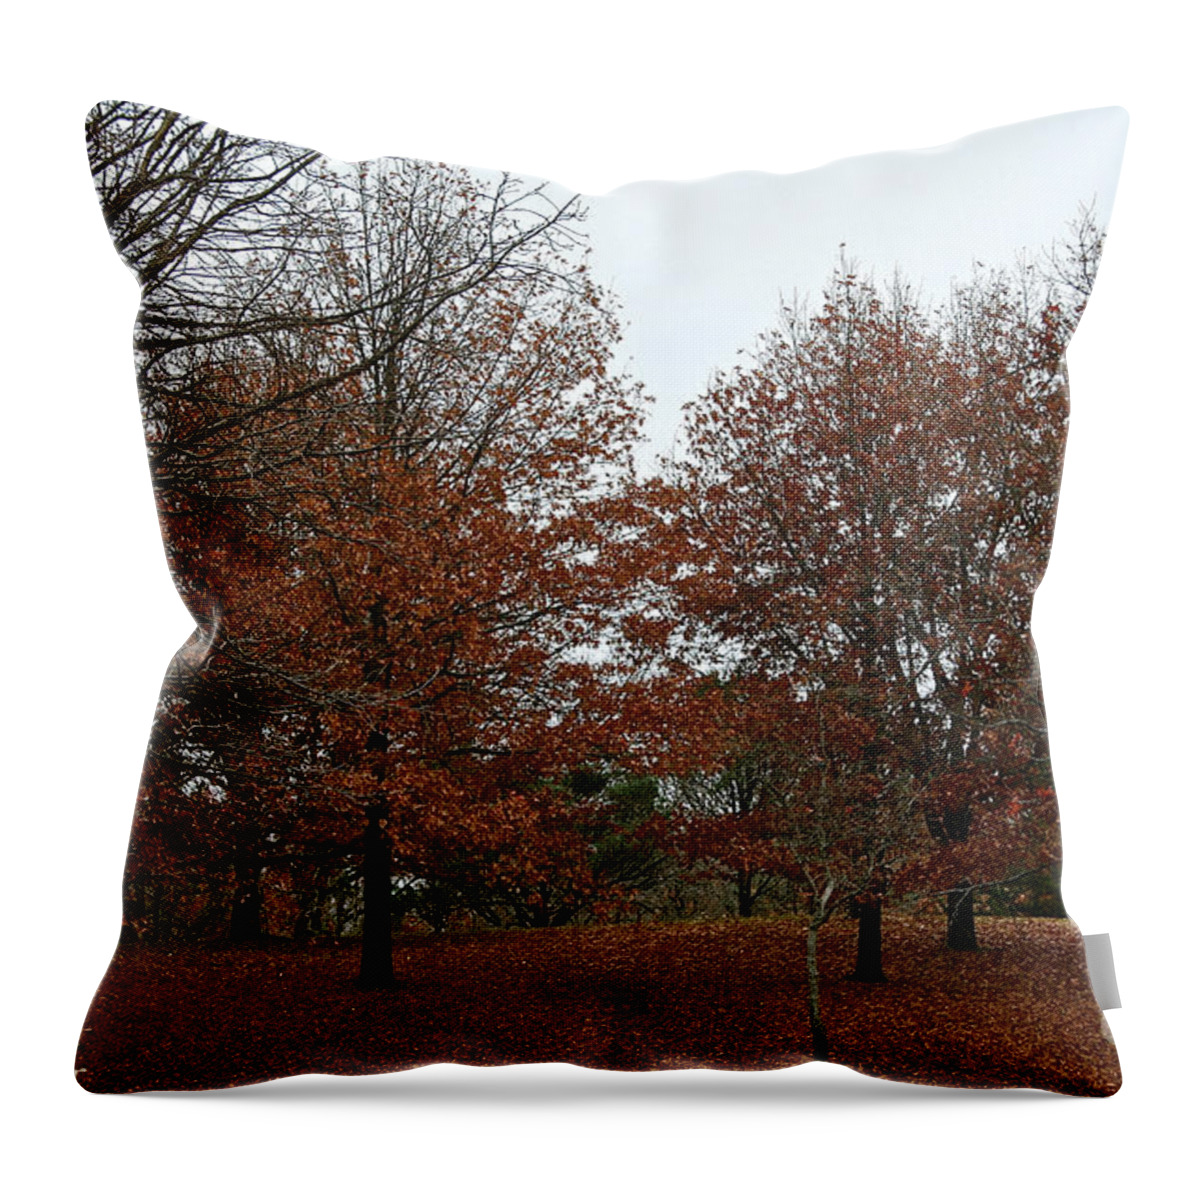 Outdoors Throw Pillow featuring the photograph Carpeted by Susan Herber